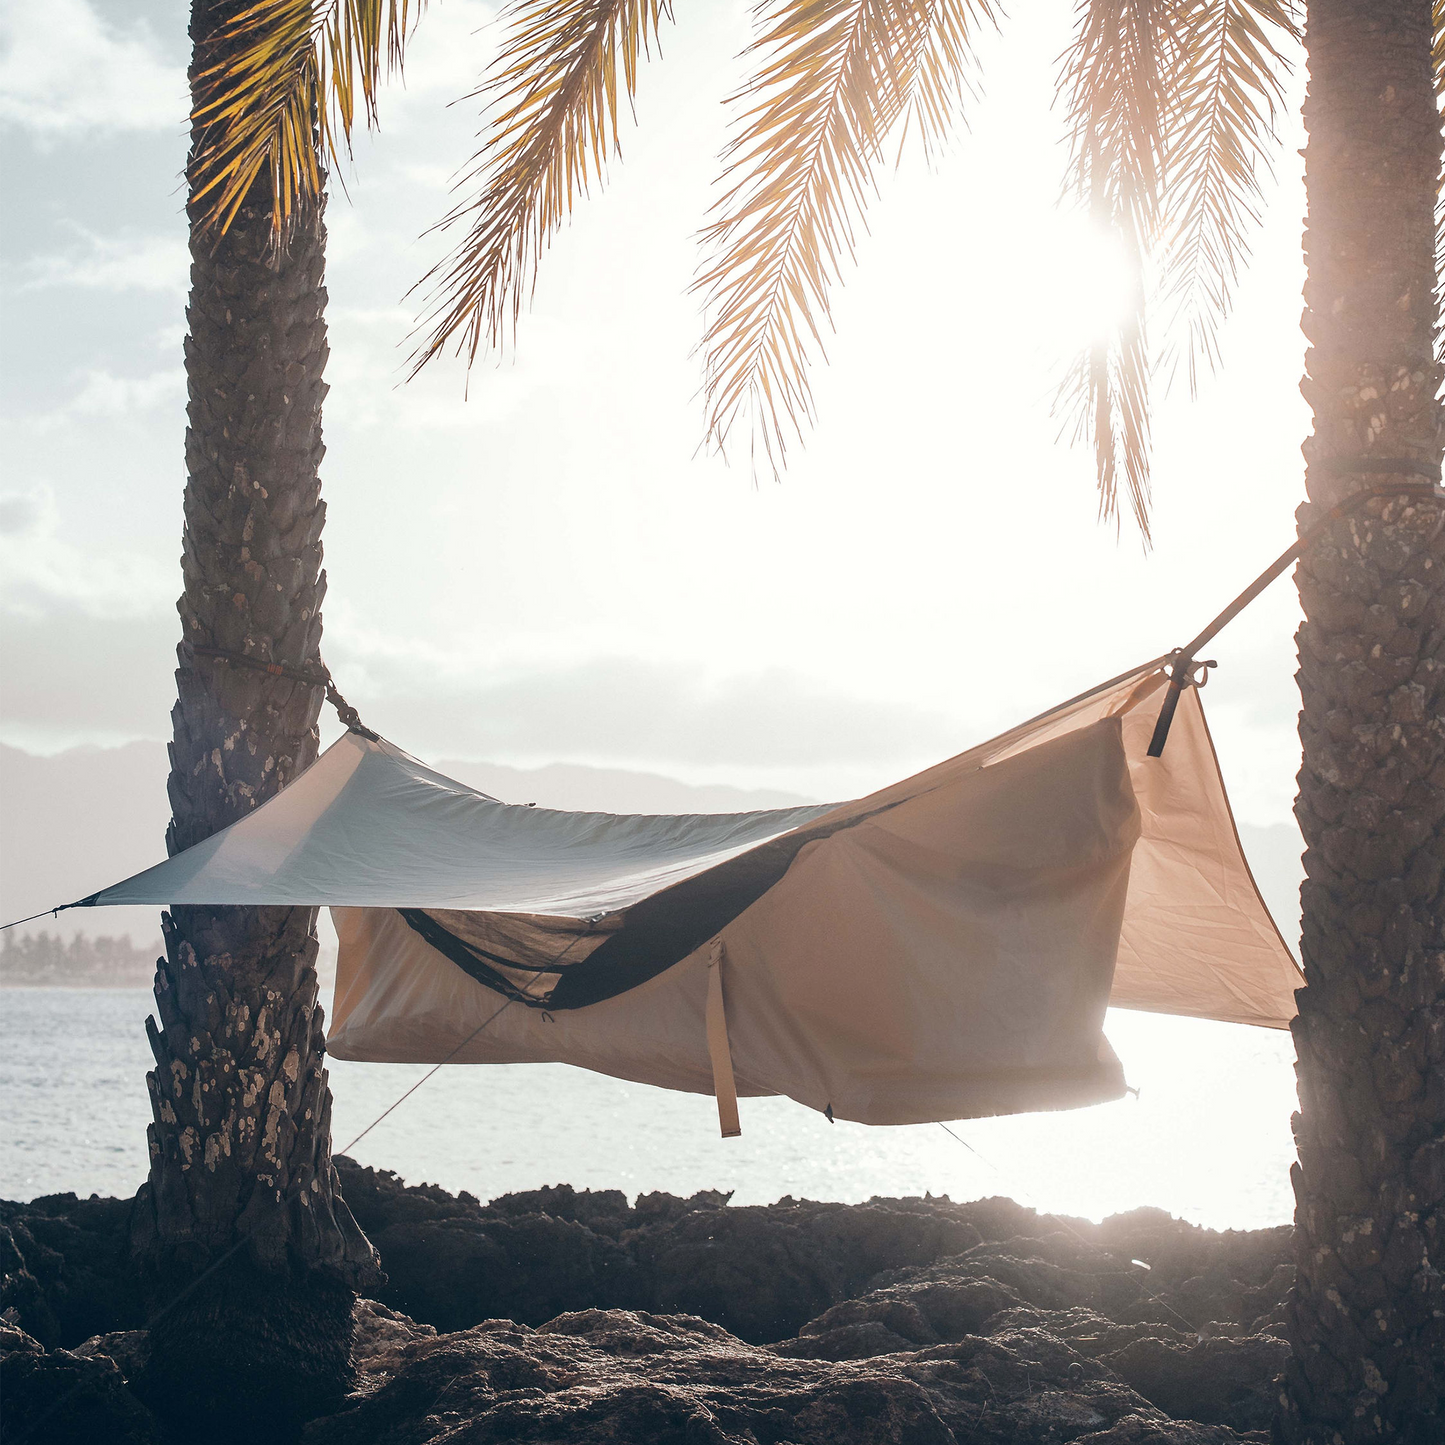 Glamping hammock on the beach between palm trees